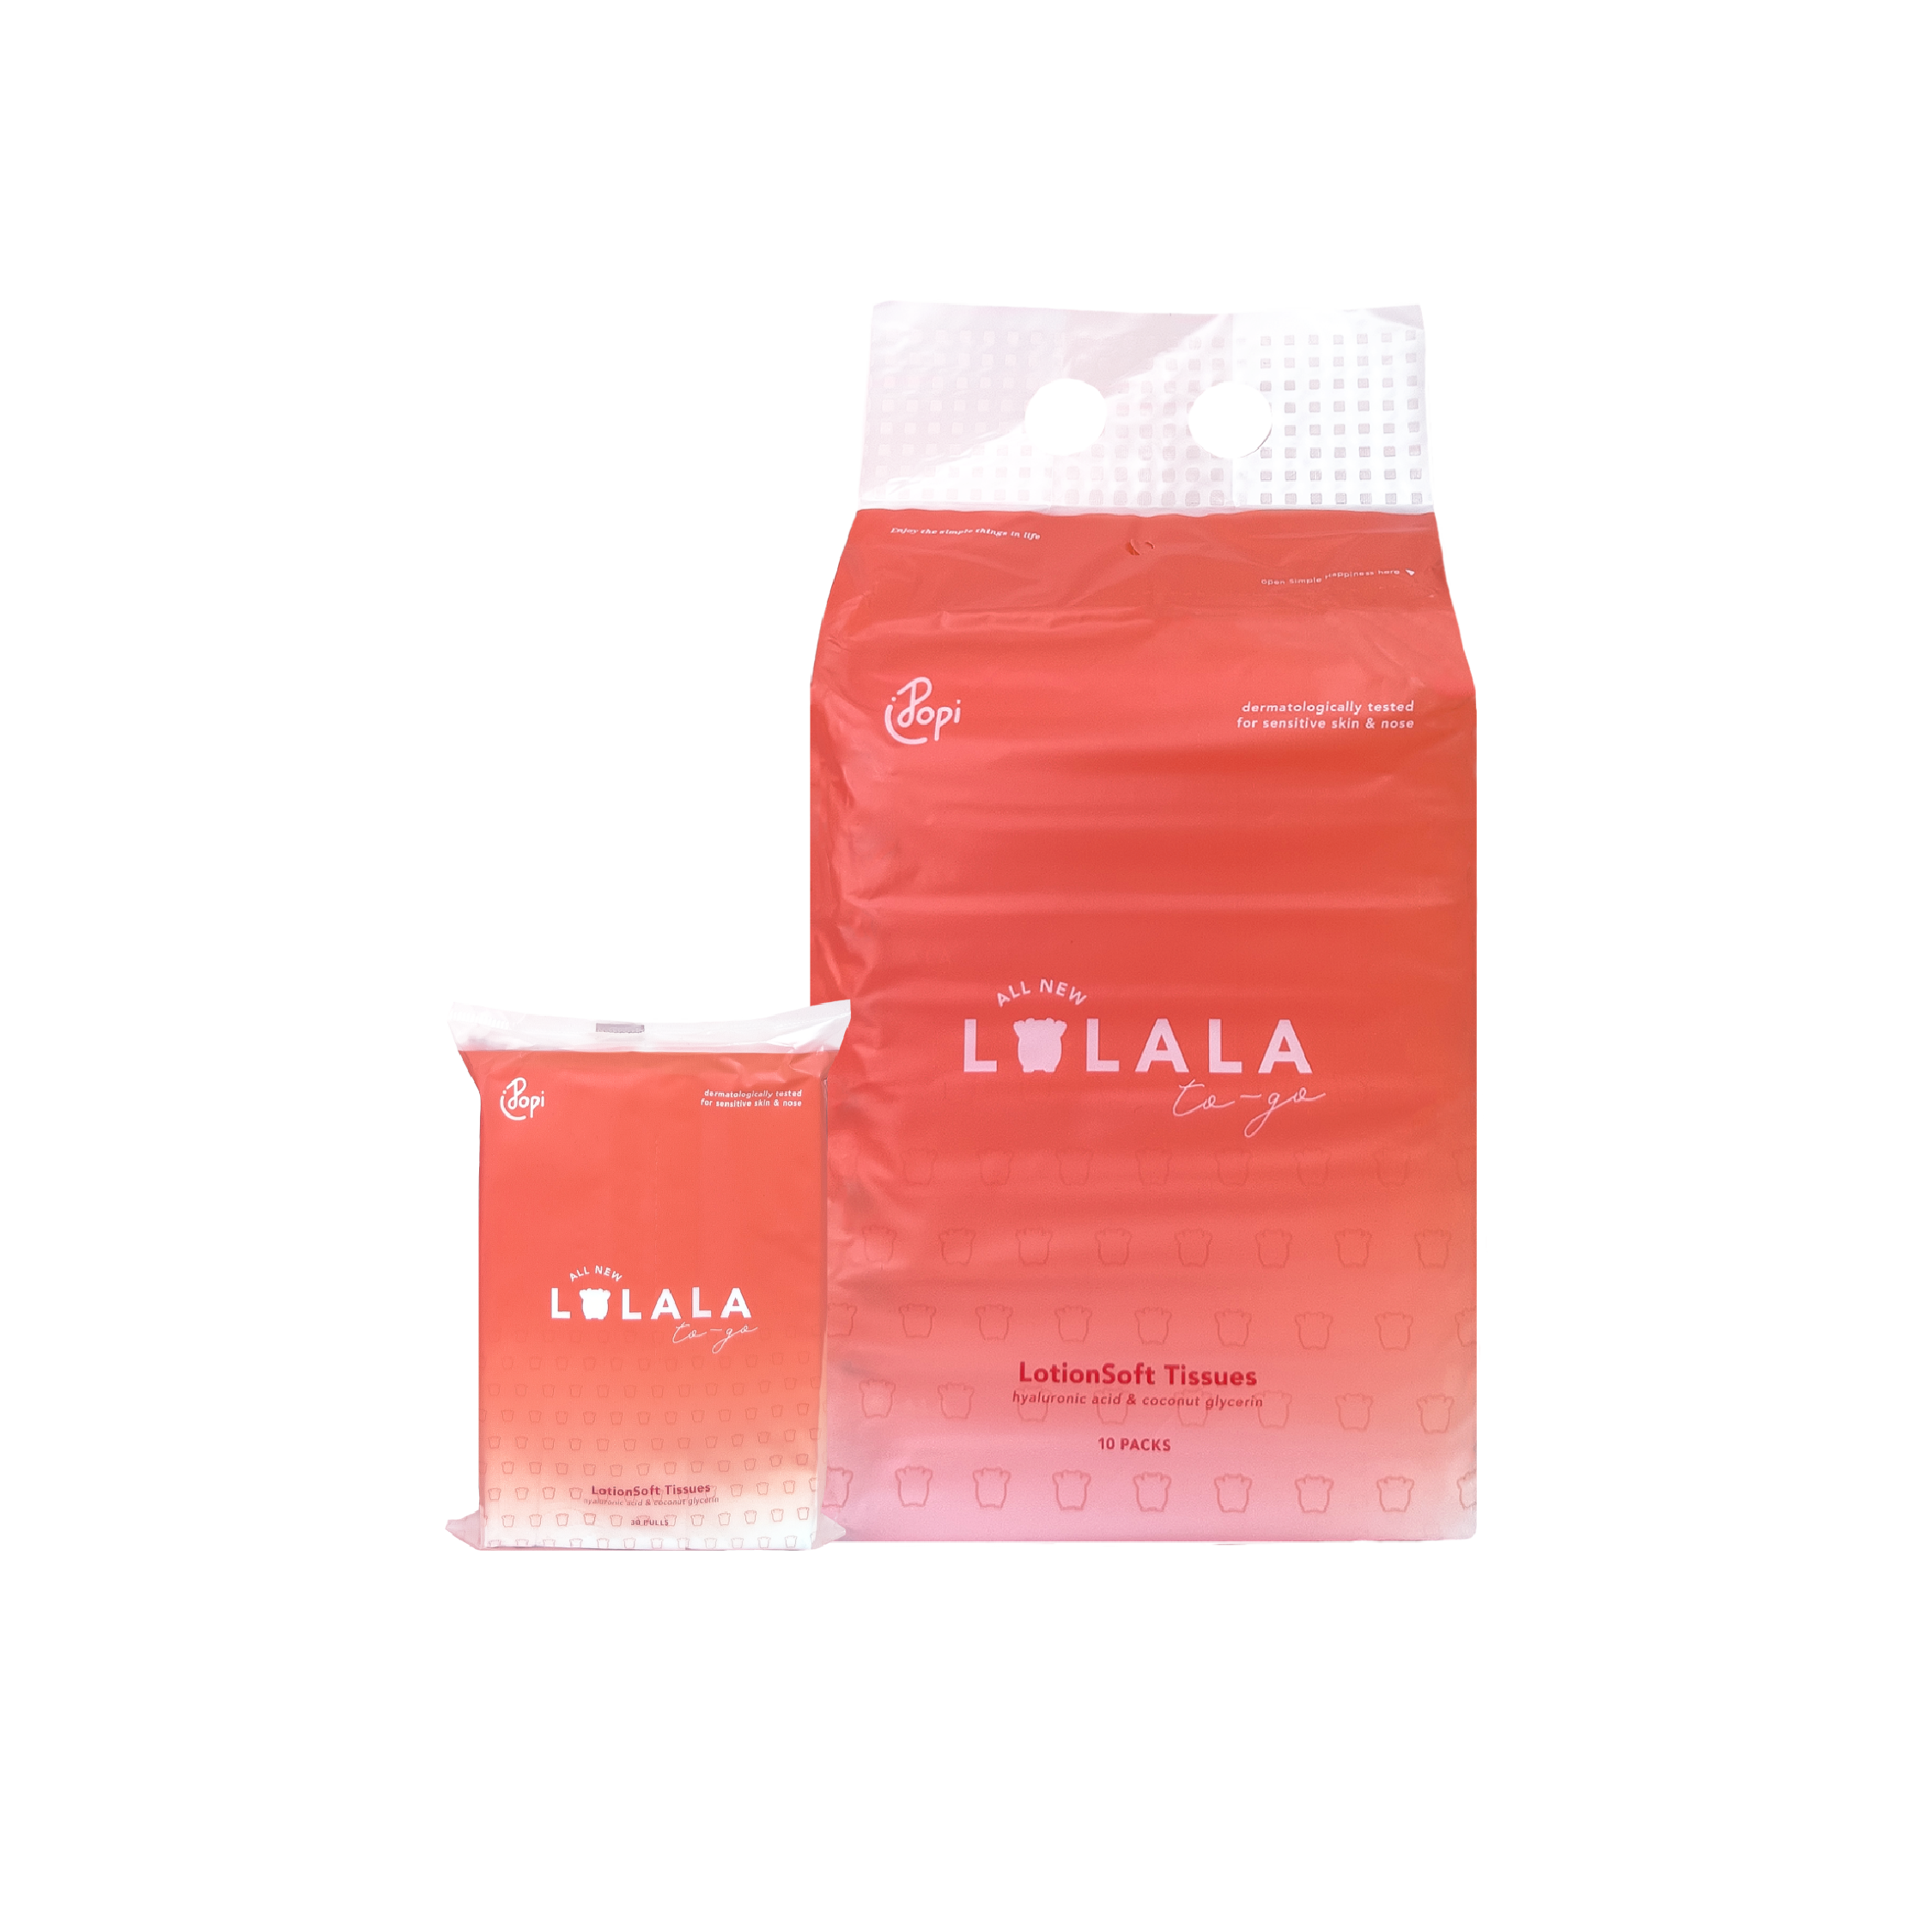 LaLaLa To-go 4 ply Lotion Tissues 30 pulls